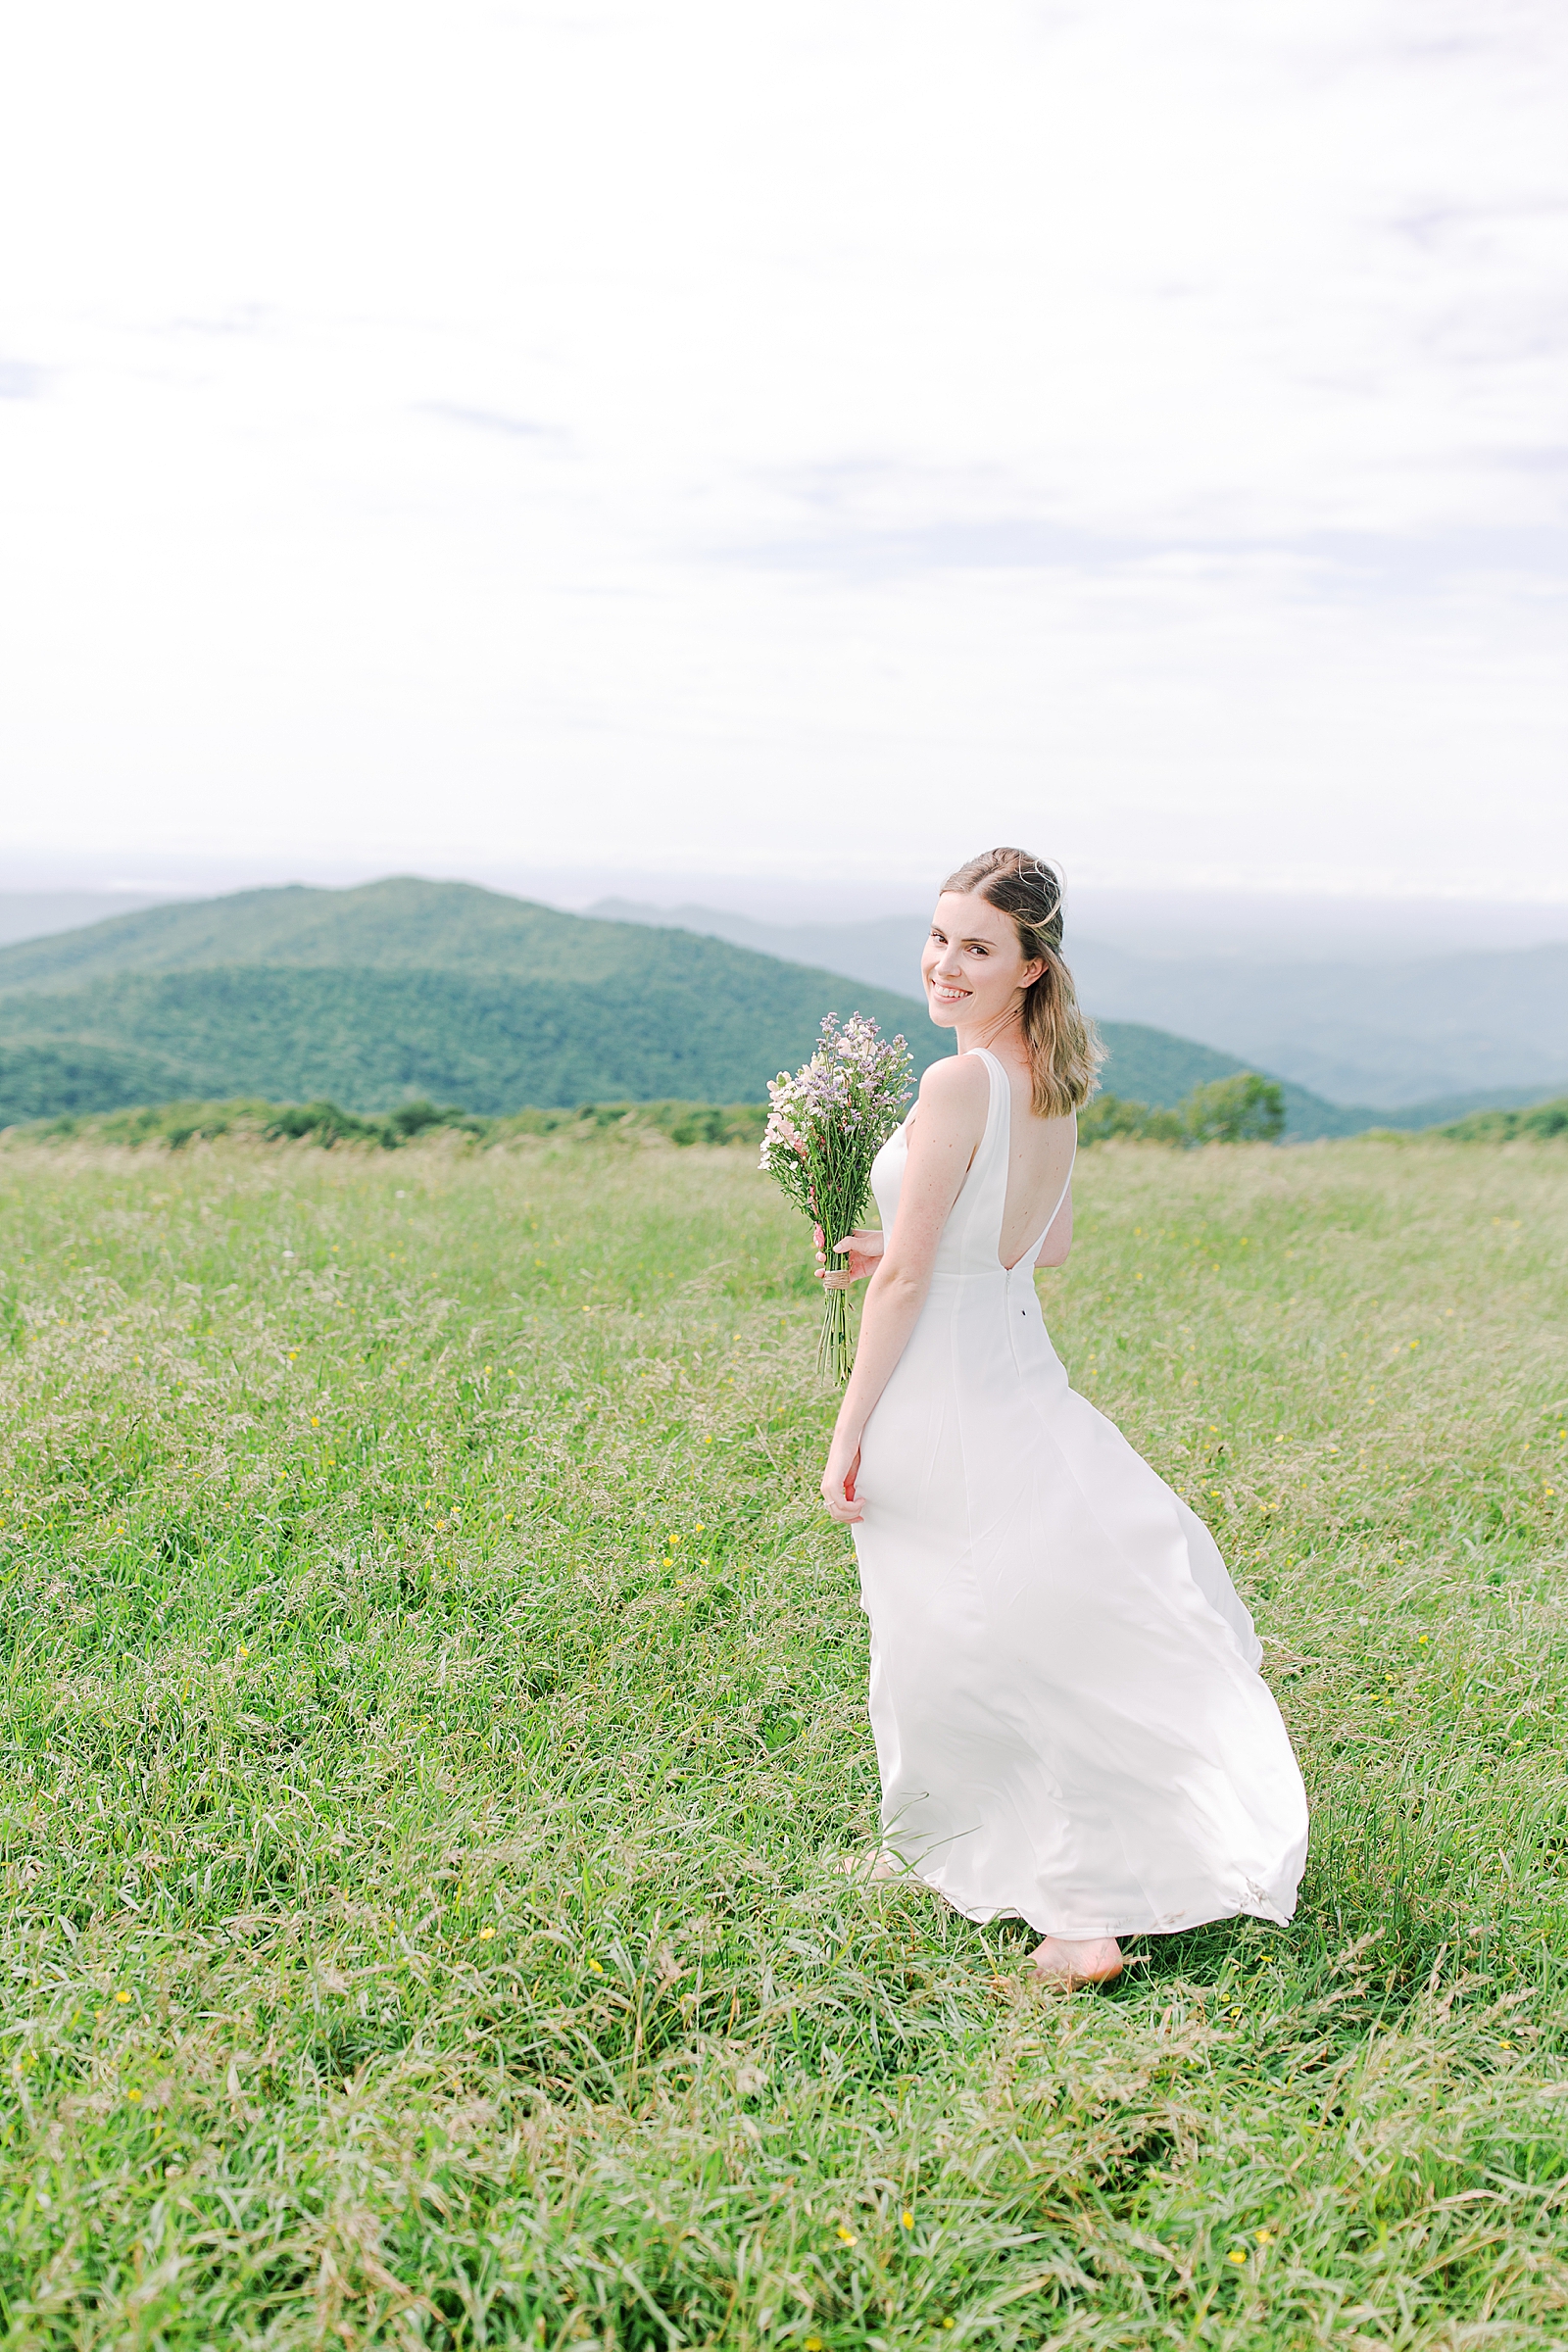 Max Patch Elopement Bride Looking Over Shoulder in Filed with Mountains Photo